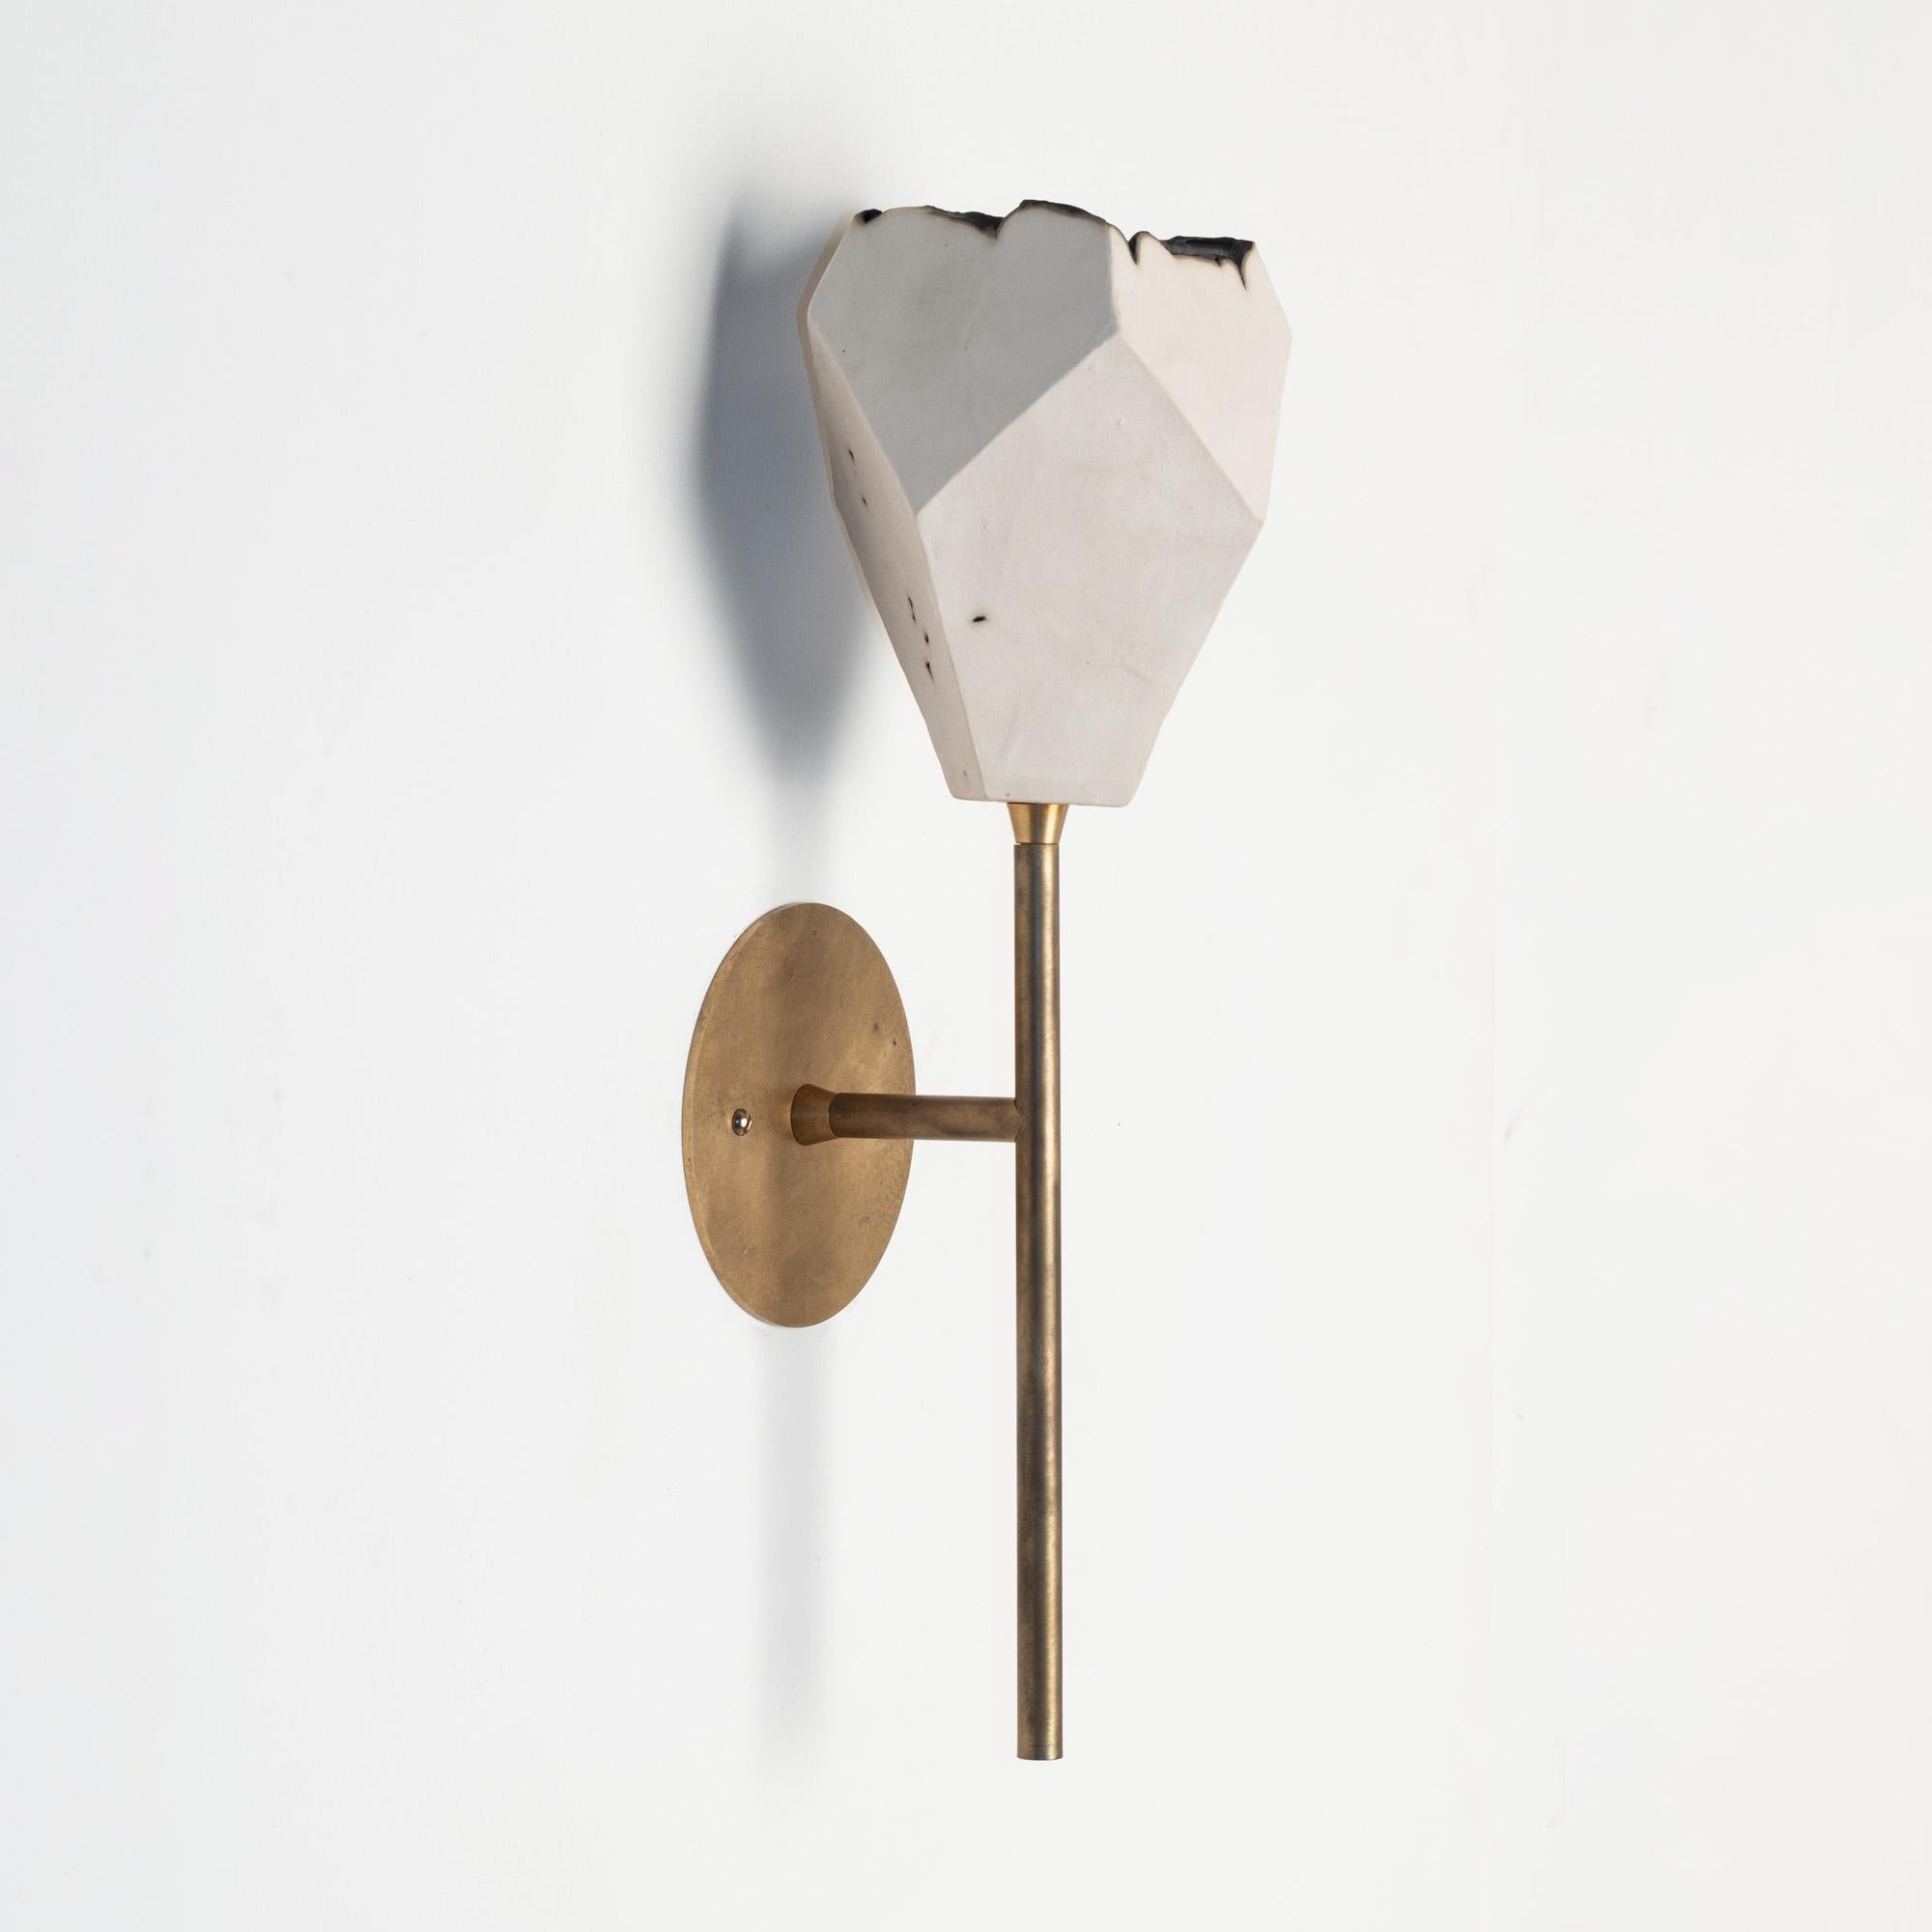 This sculptural wall sconce features a clean geometric shape and a unique textural matte finish. The shade is handcrafted from slabs of unglazed white porcelain with highly individual black oxide burnout detailing at the edges. Unfinished brass